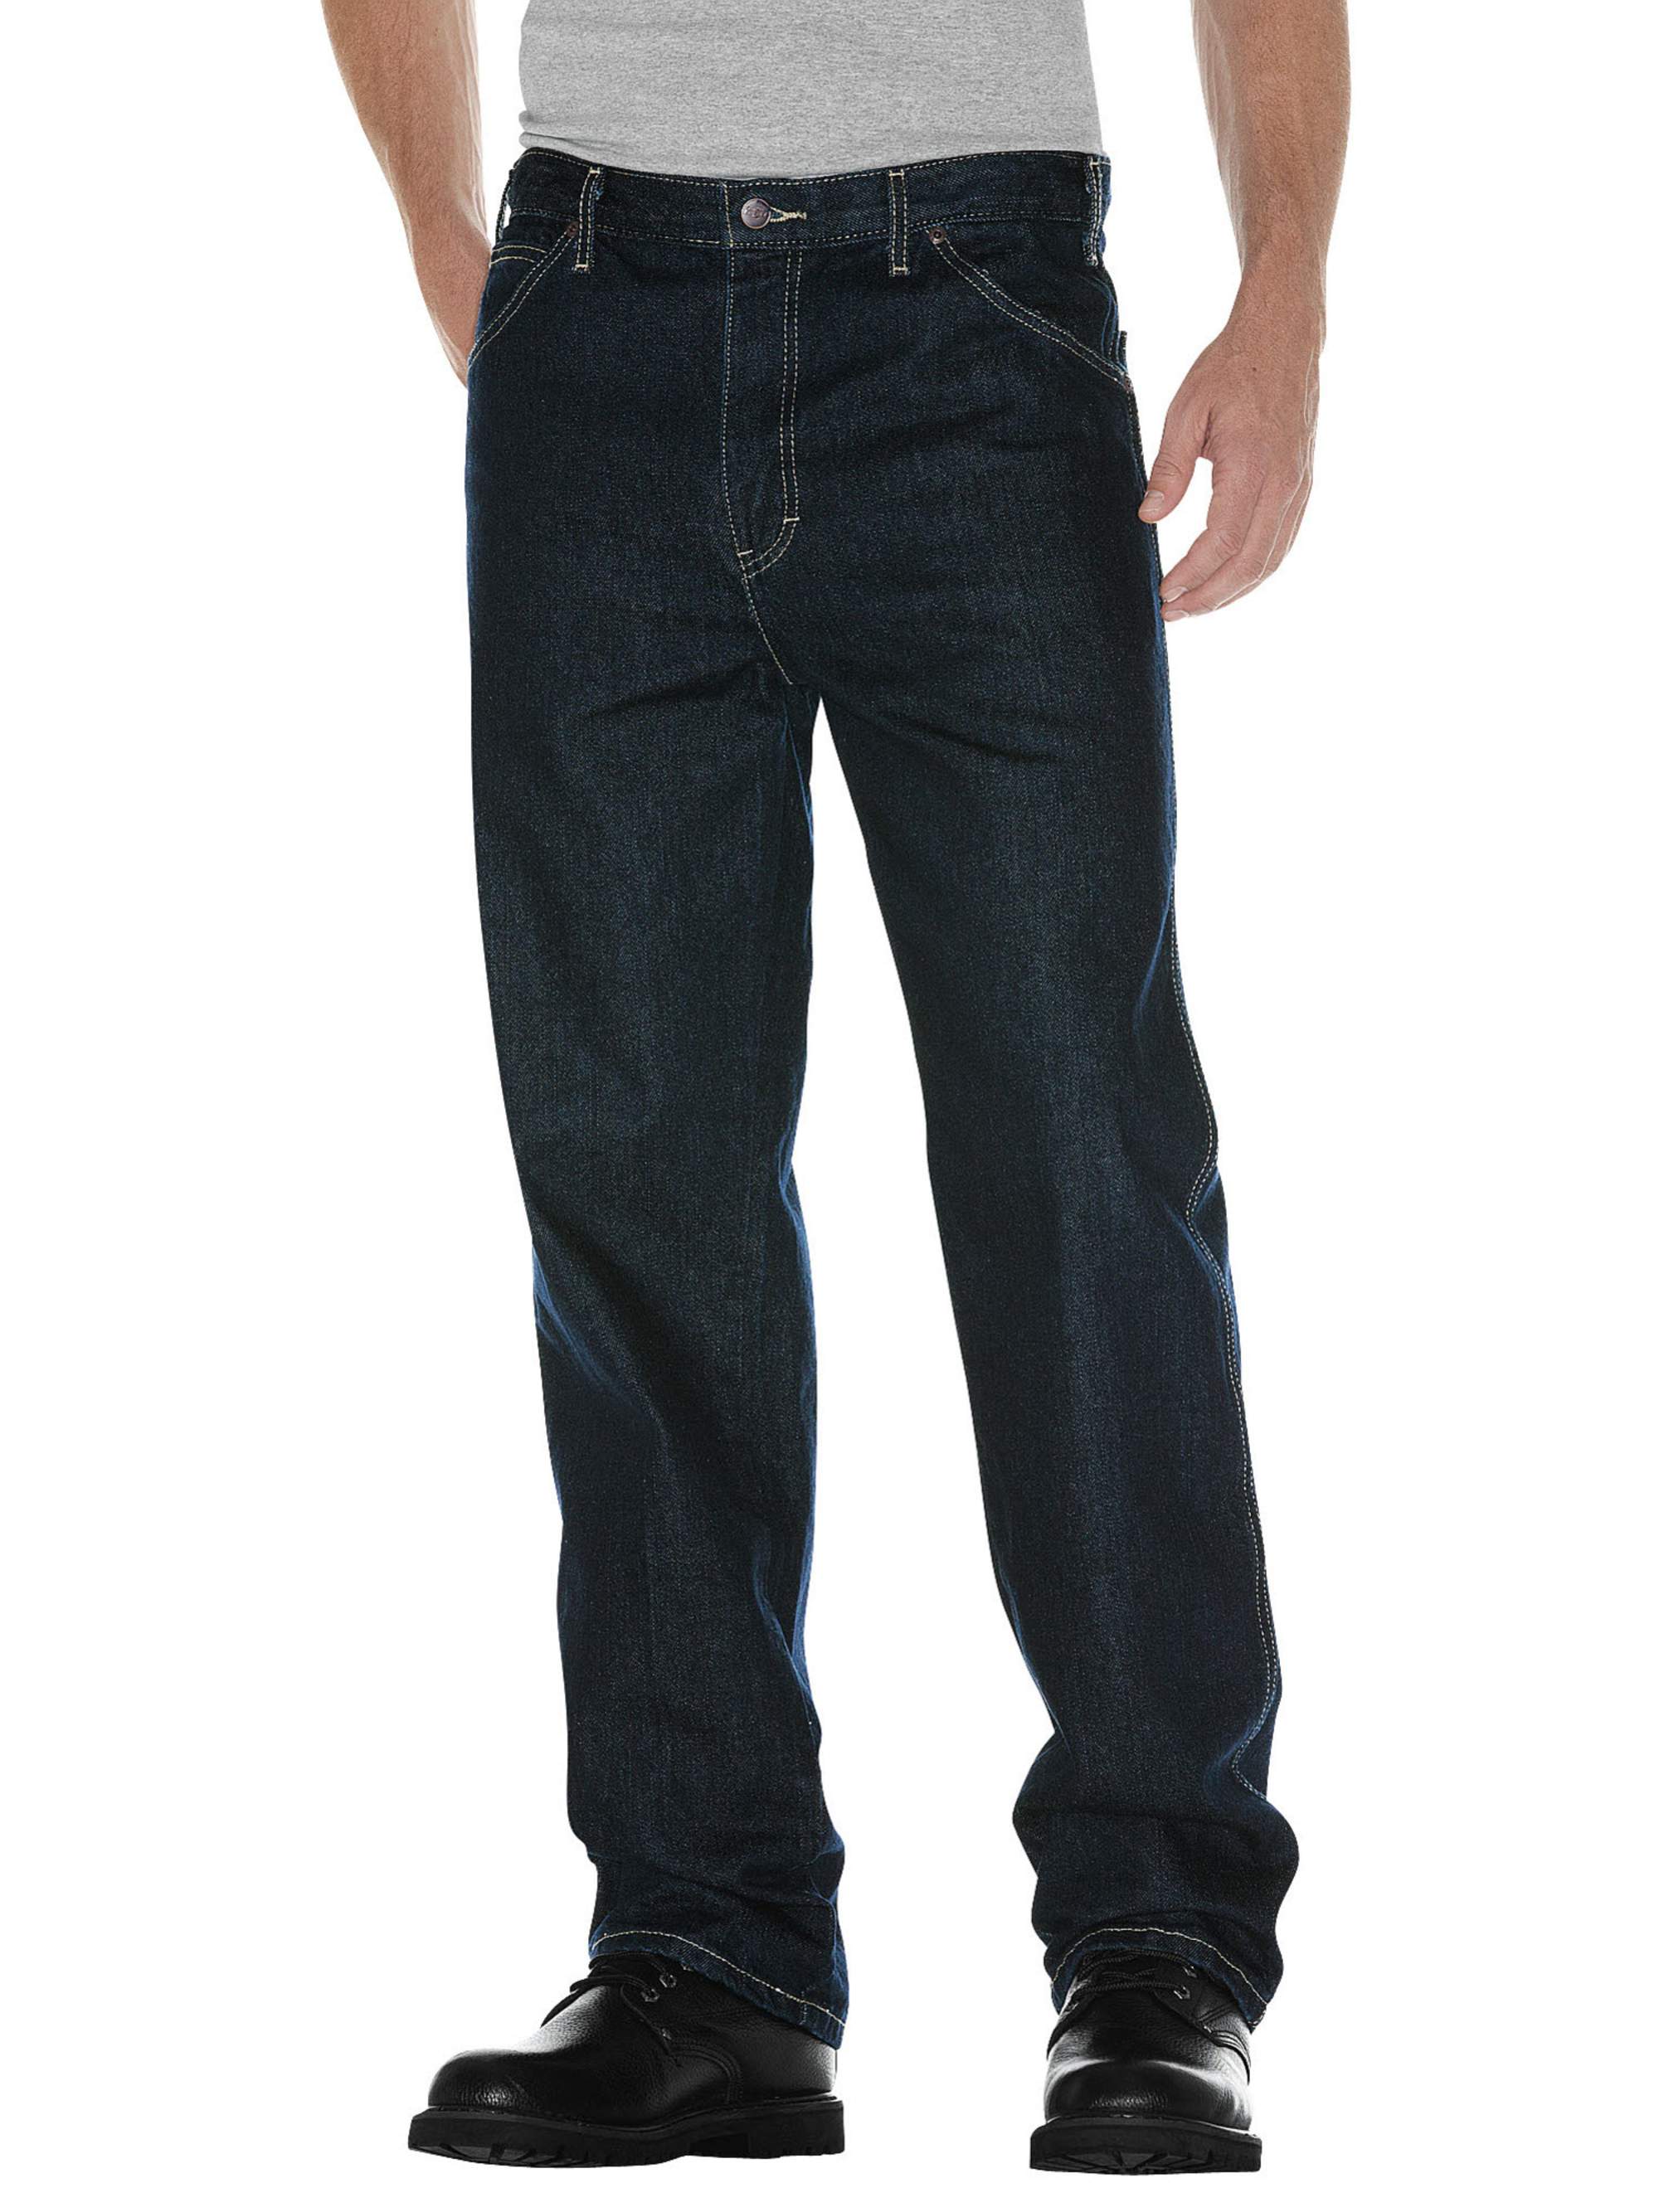 Dickies Mens and Big Mens Relaxed Straight Fit 5-Pocket Denim Jeans - image 1 of 3